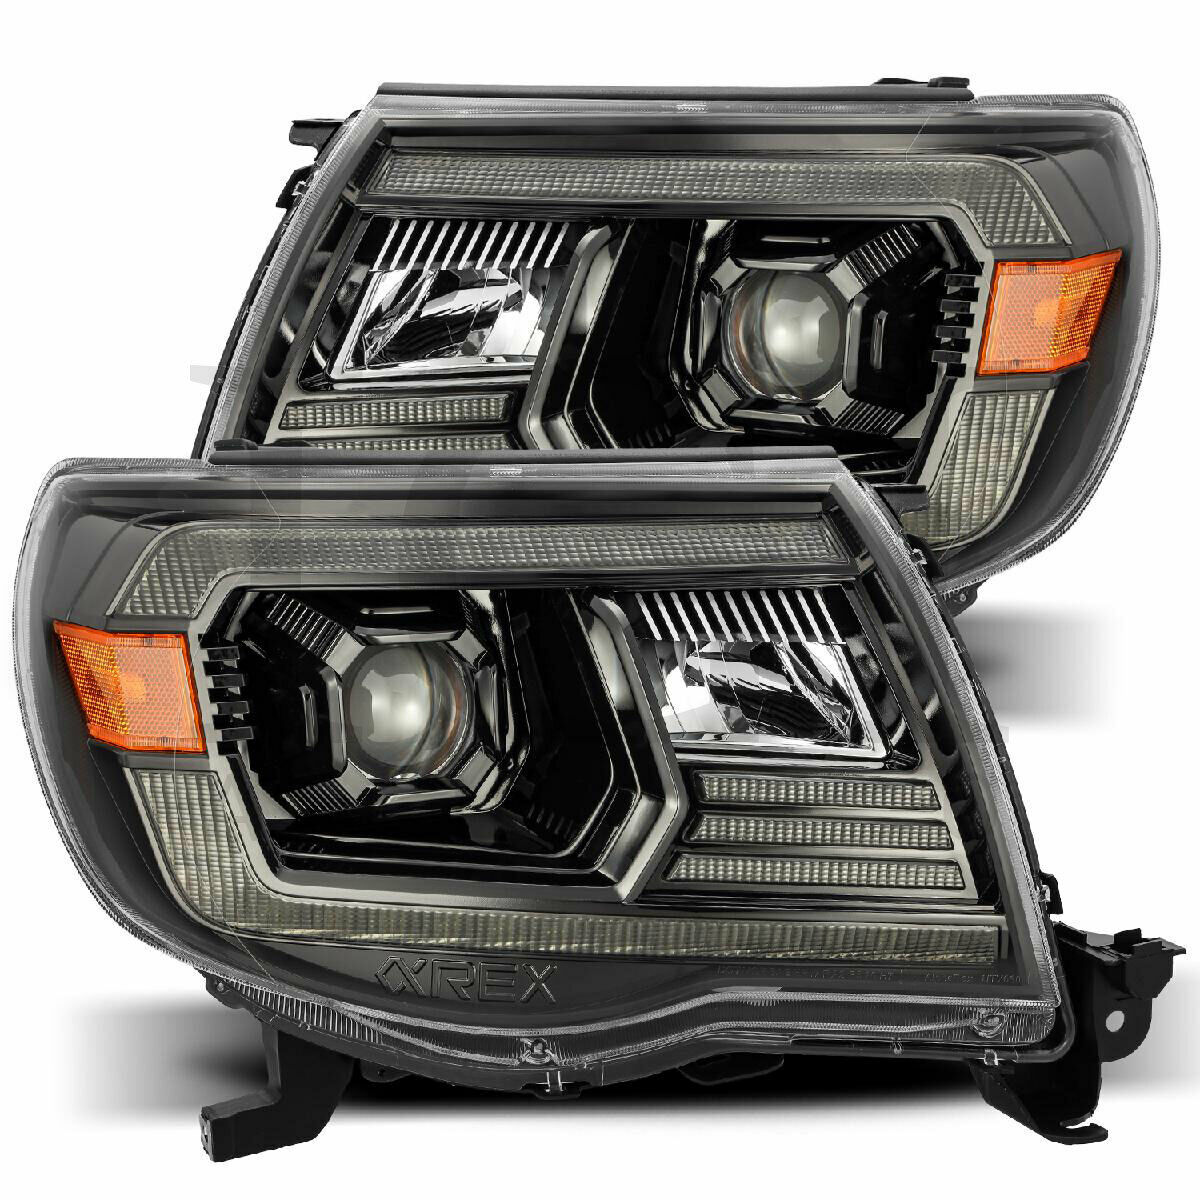 Picture of Alpharex USA ALR880736 Pro-Series Projector Headlights for 2005-2011 Toyota Tacoma